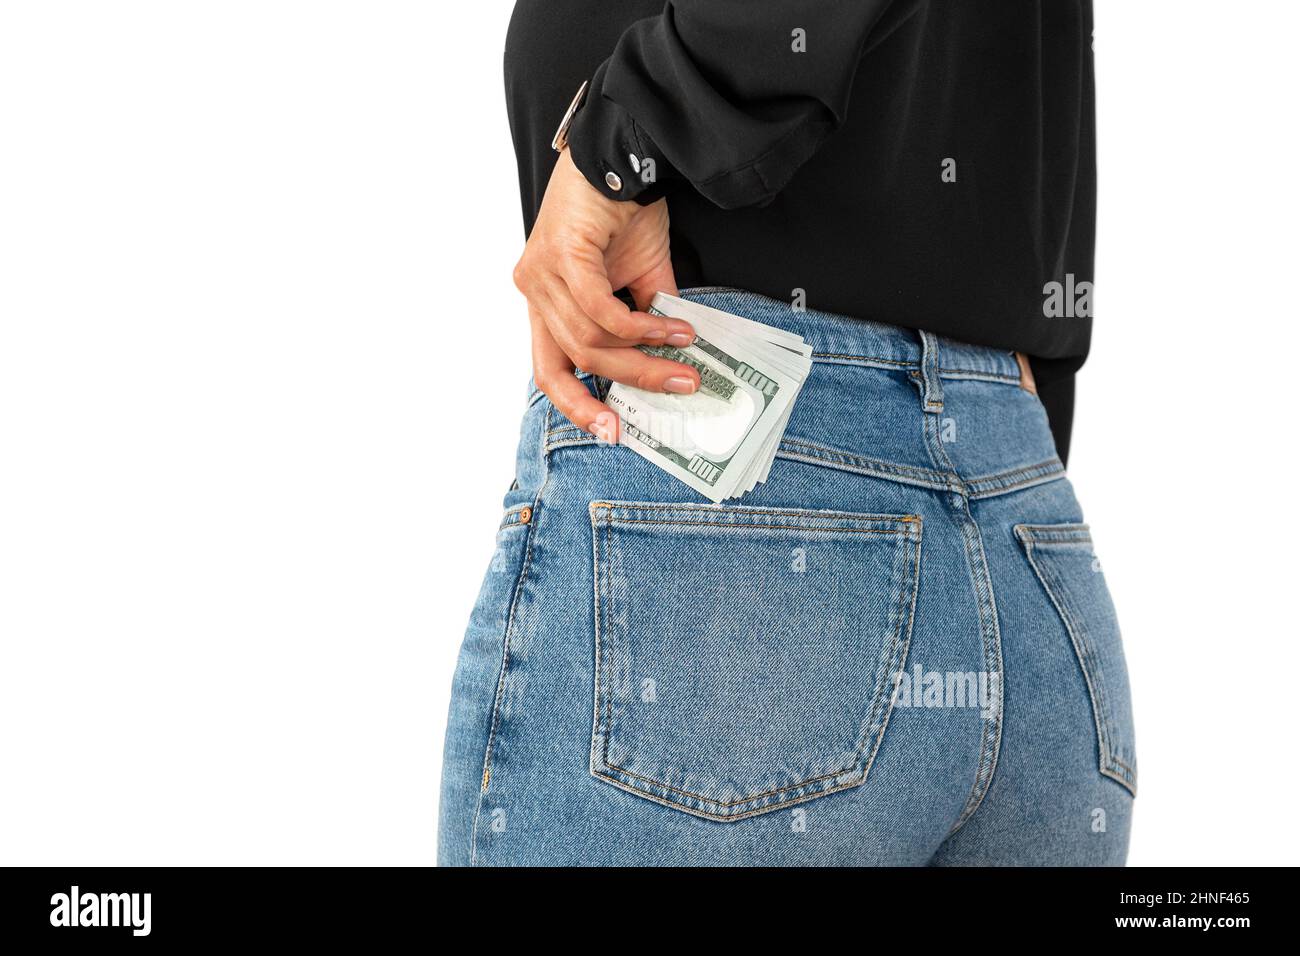 Woman putting money in her back pocket. one hundred american dollars bill Stock Photo